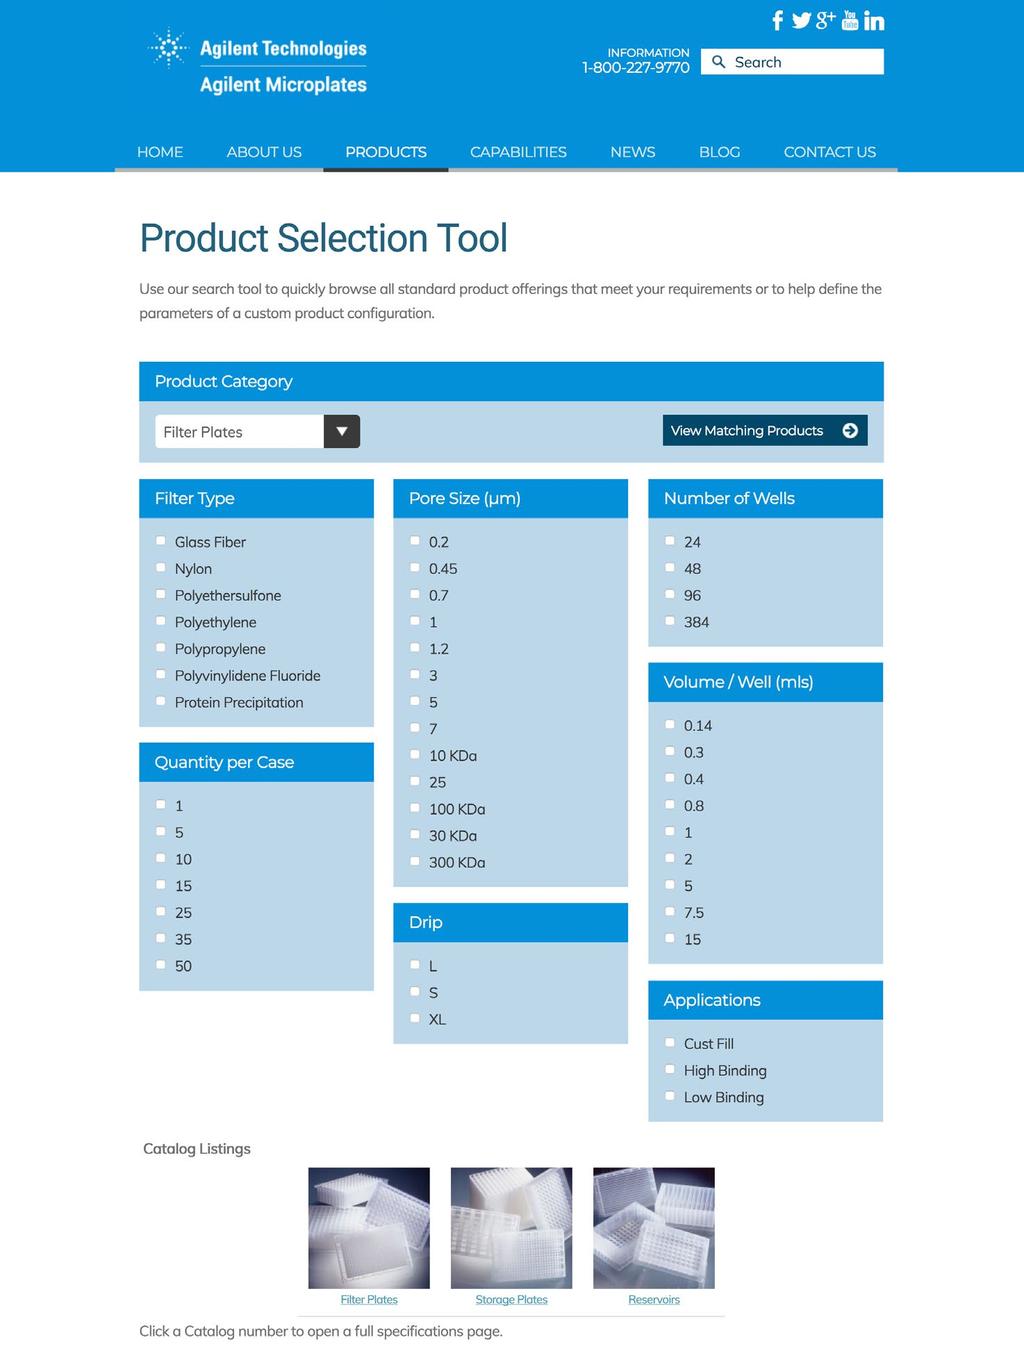 Product Selection Tool Online, Quick, and Simple Search Finding the product that meets your exact requirements is easy with our Product Selection Tool.